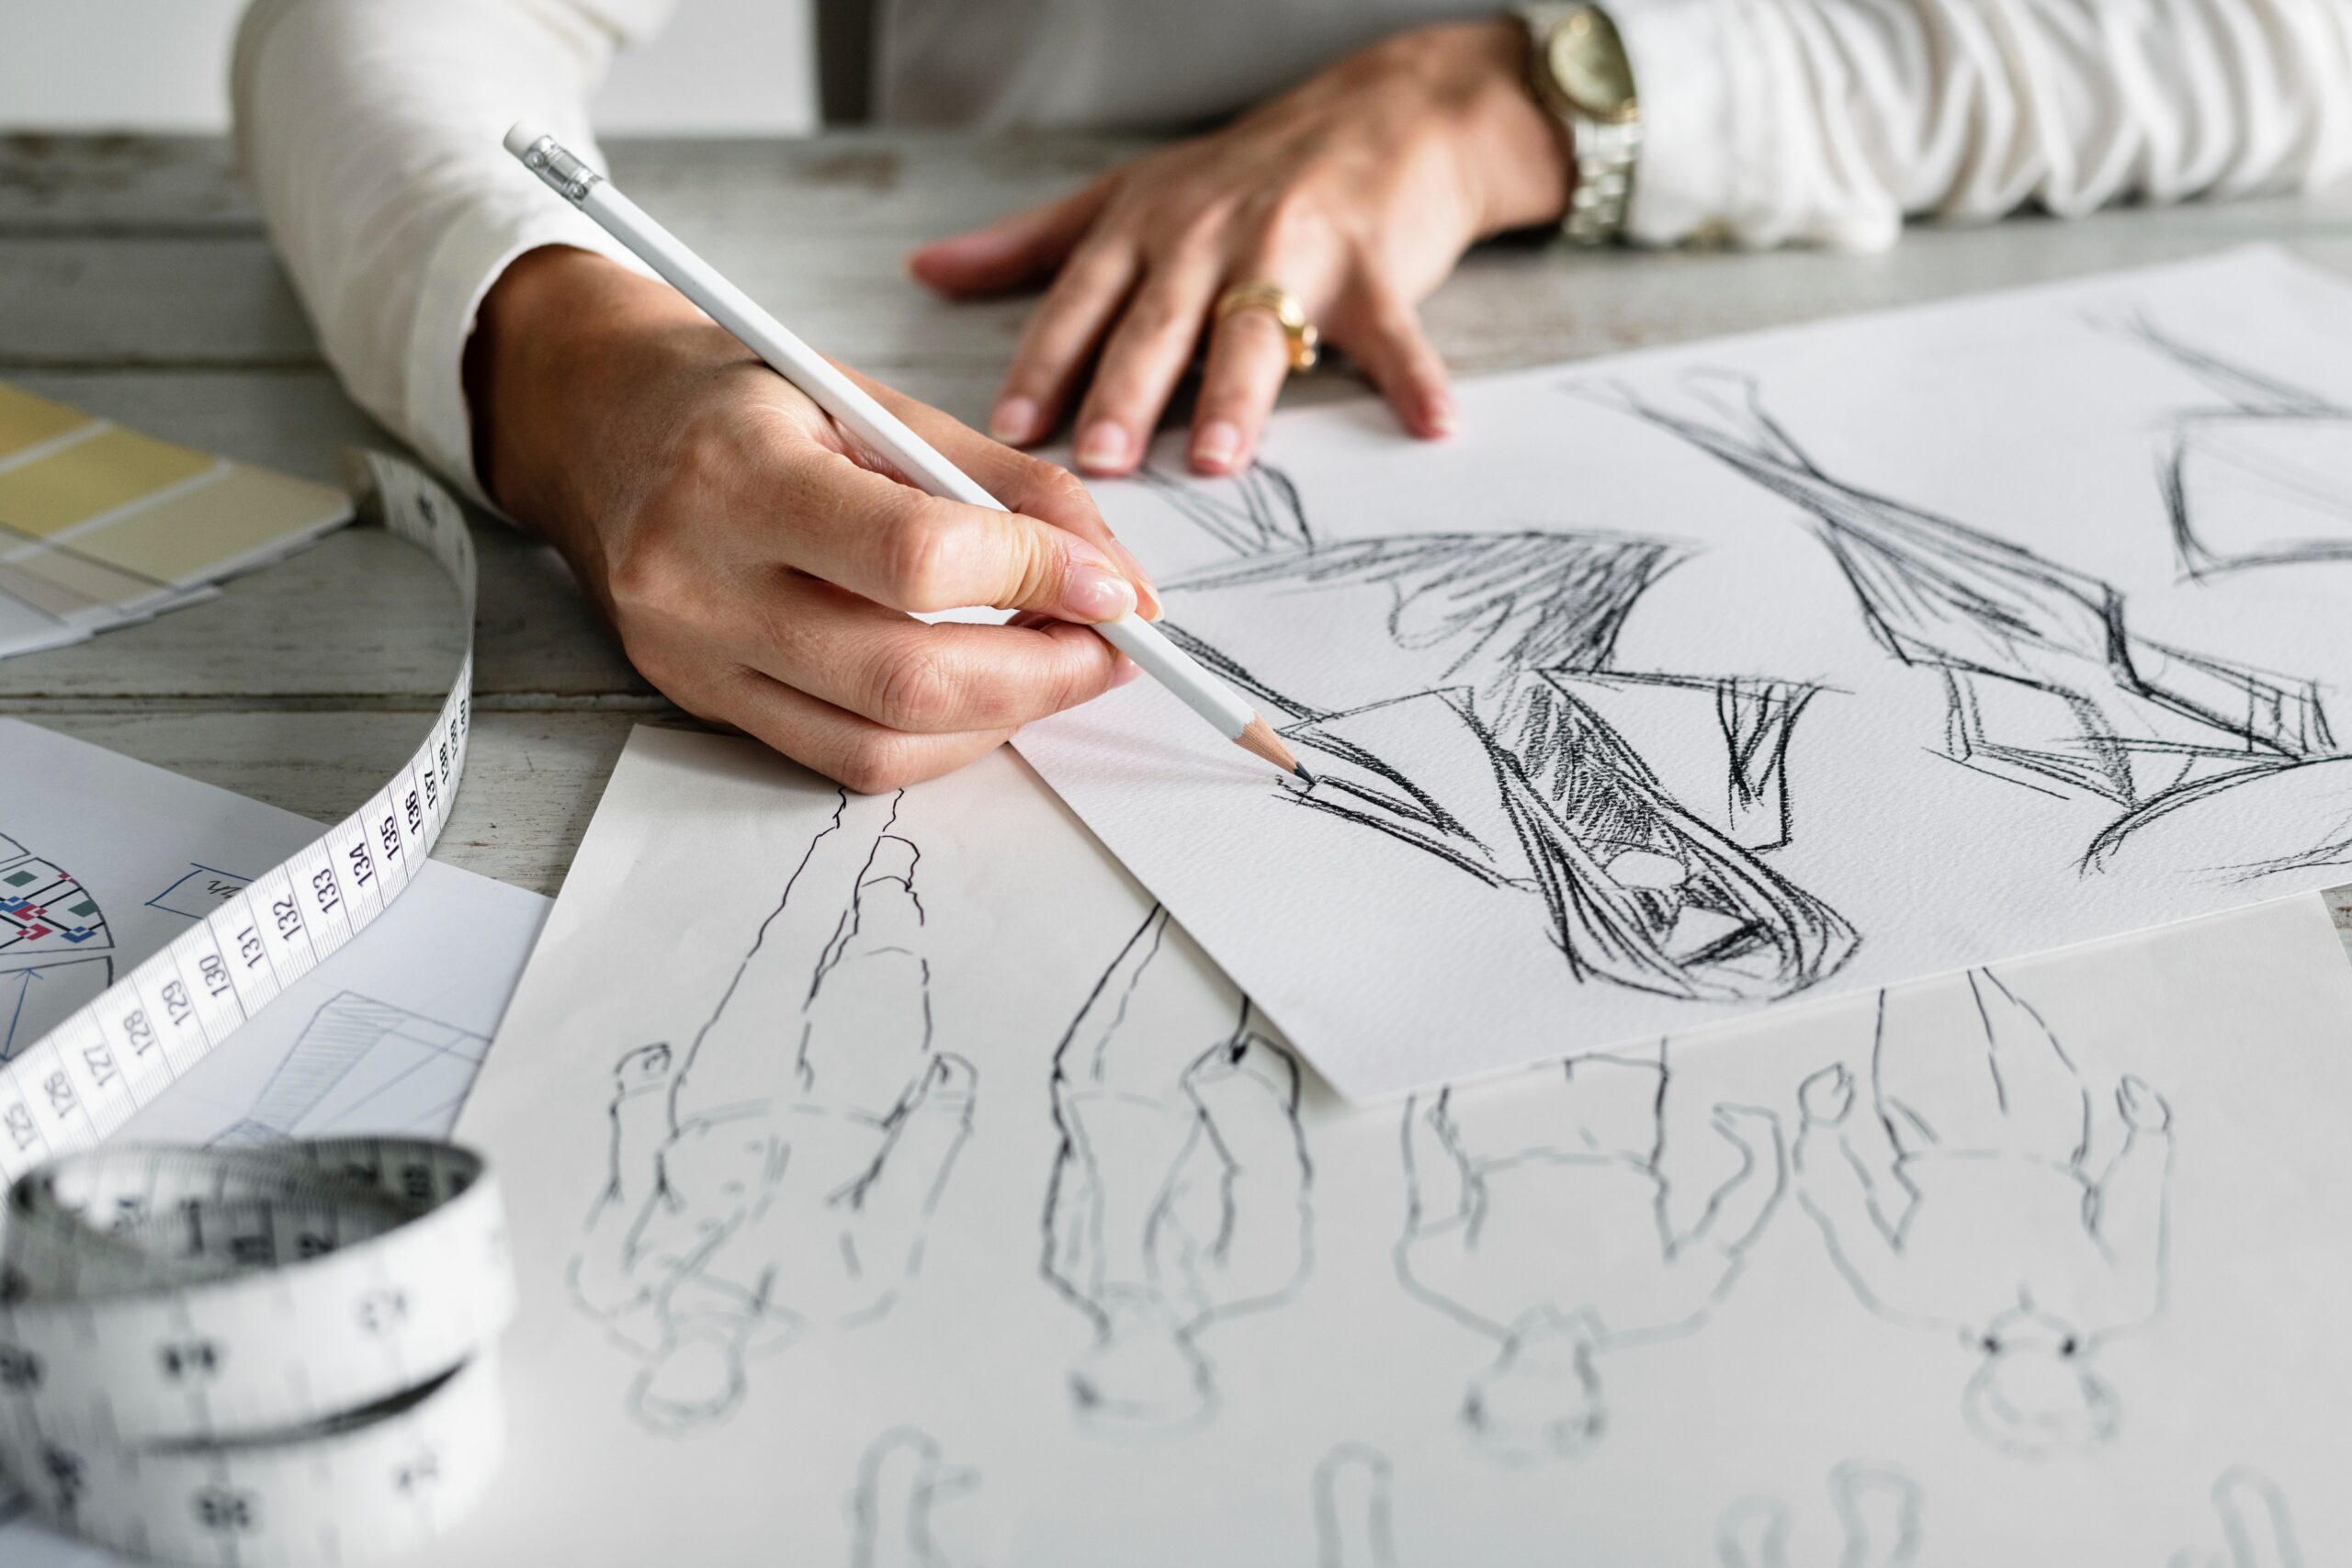 An Overview Of Fashion Illustration